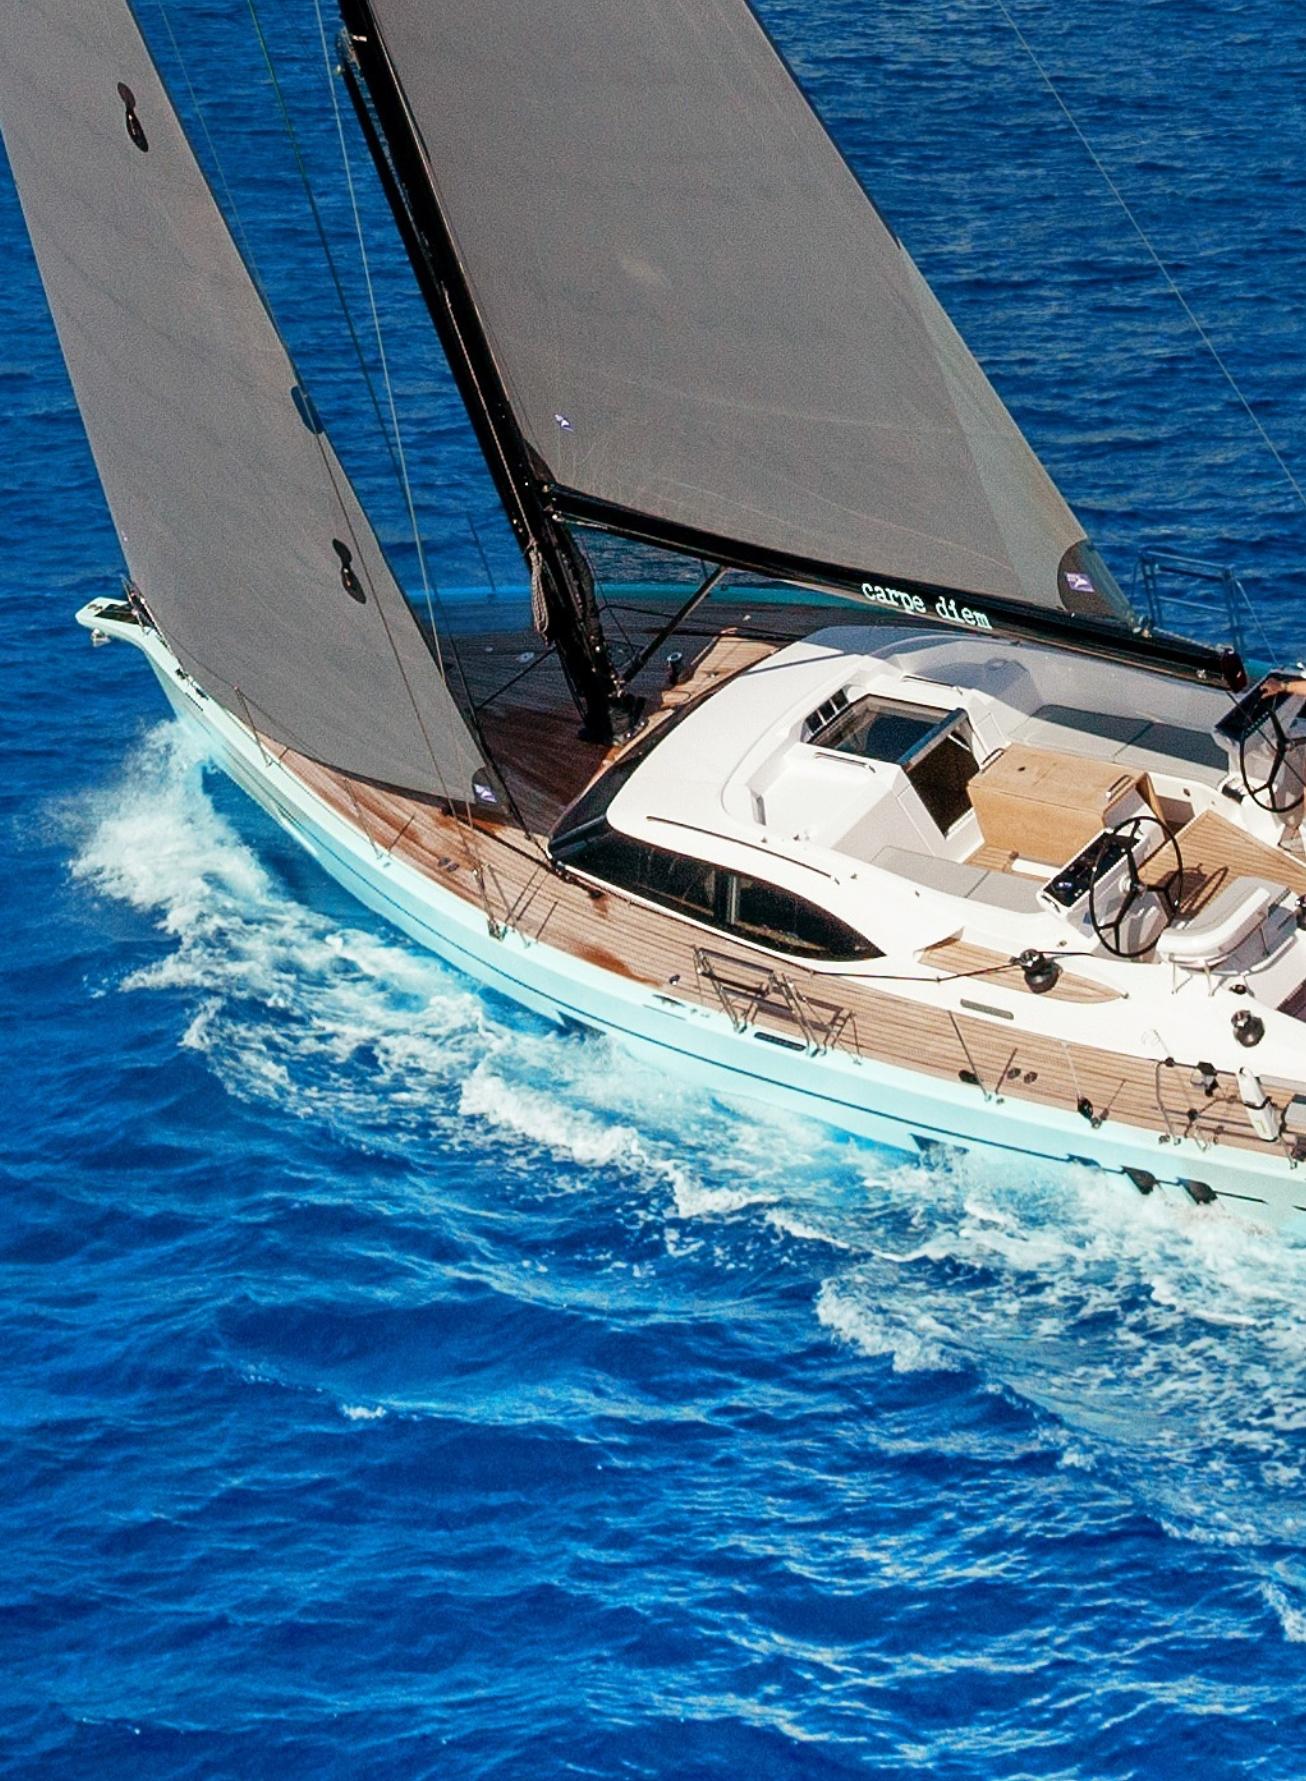 https://oysteryachts.com/assets/intro-images/oyster-495-sailing-yacht__Resampled.jpg